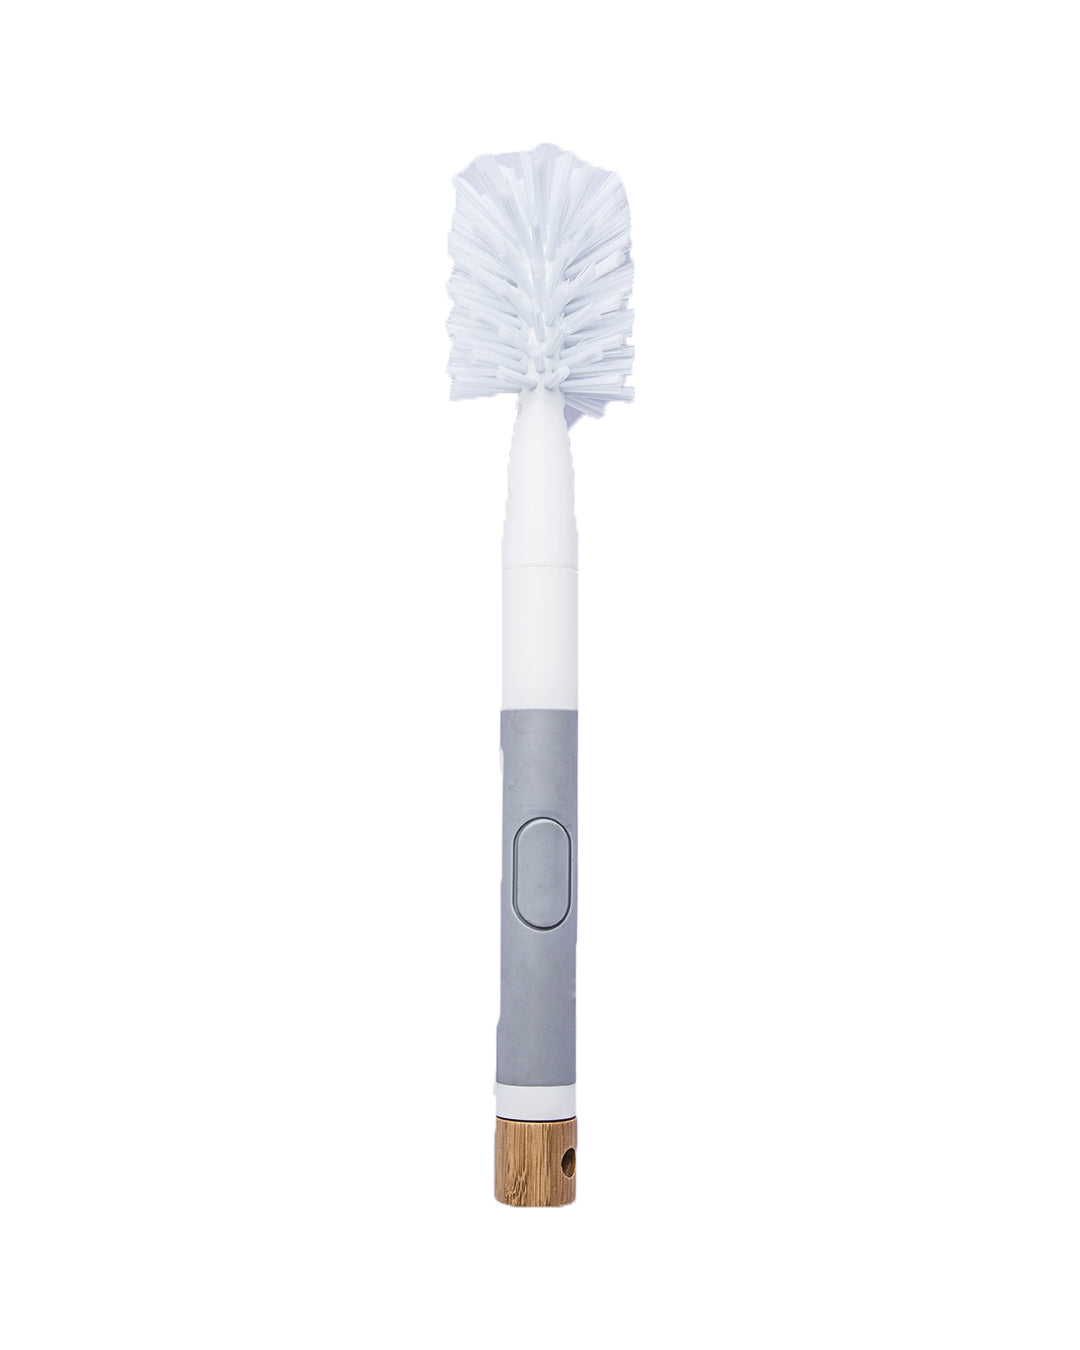 VON CASA Bottle Cleaning Brush with Long Bamboo Handle